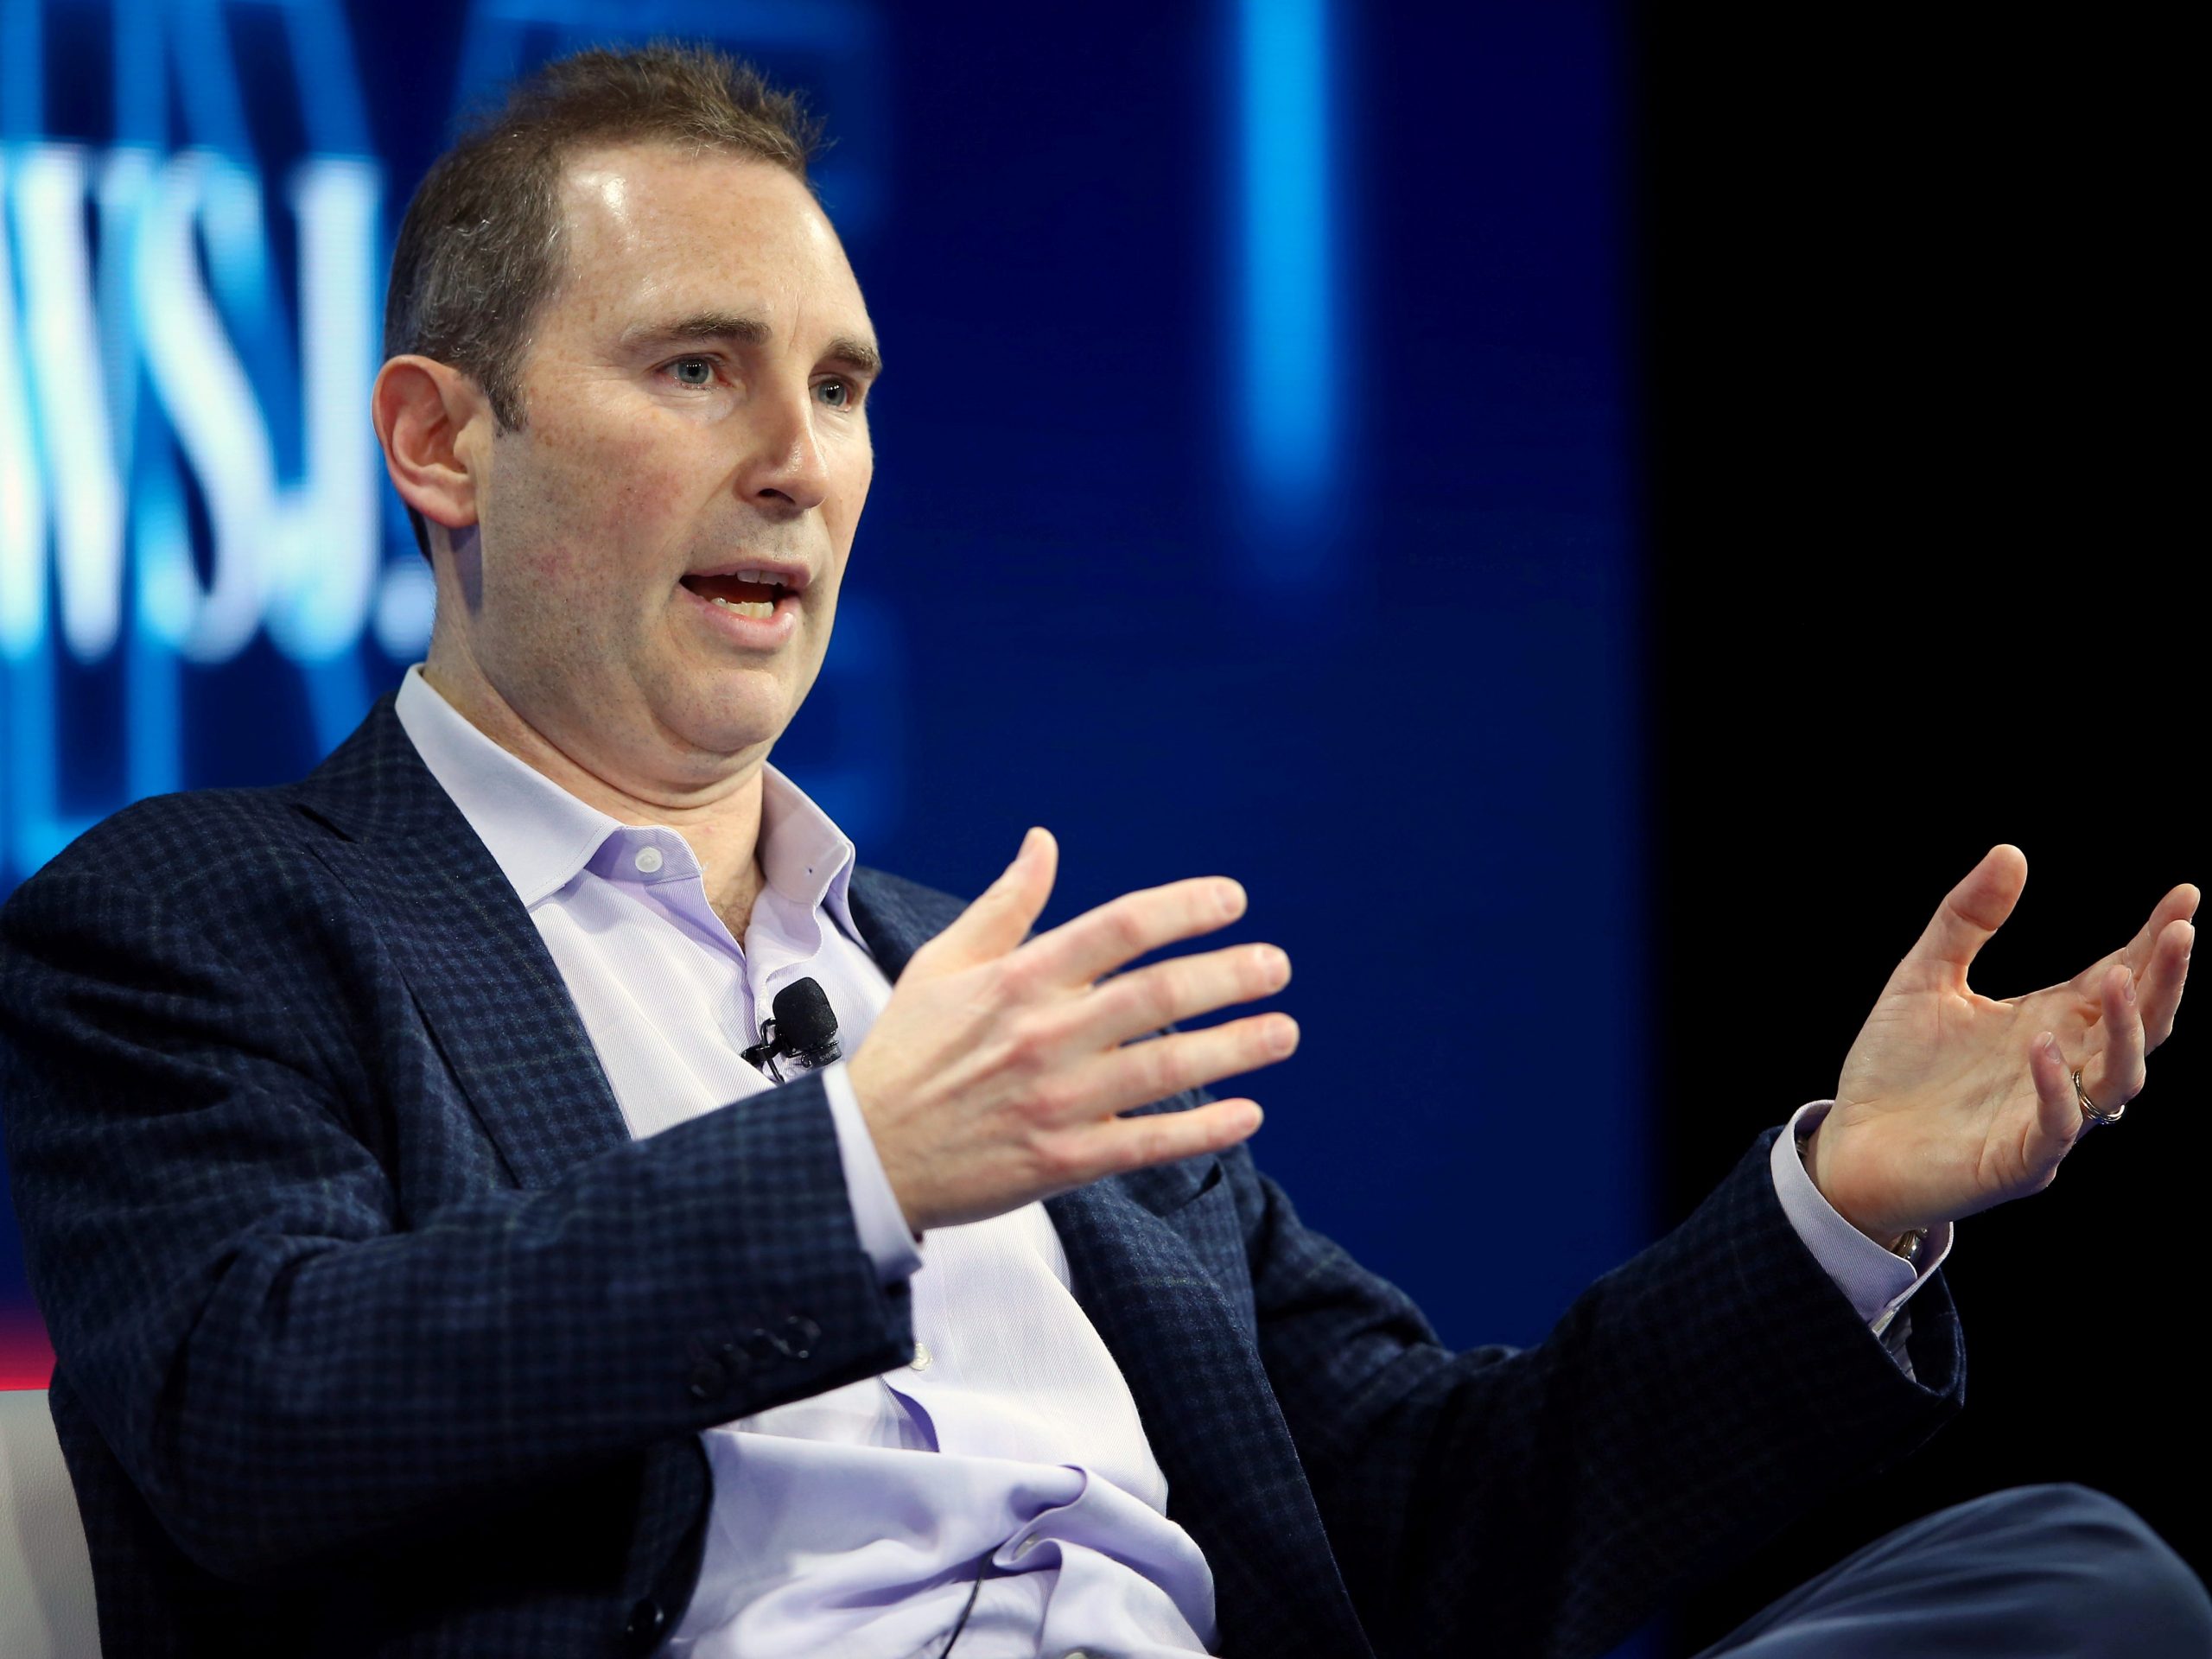 Amazon CEO Andy Jassy motions with his hands on stage at a conference.